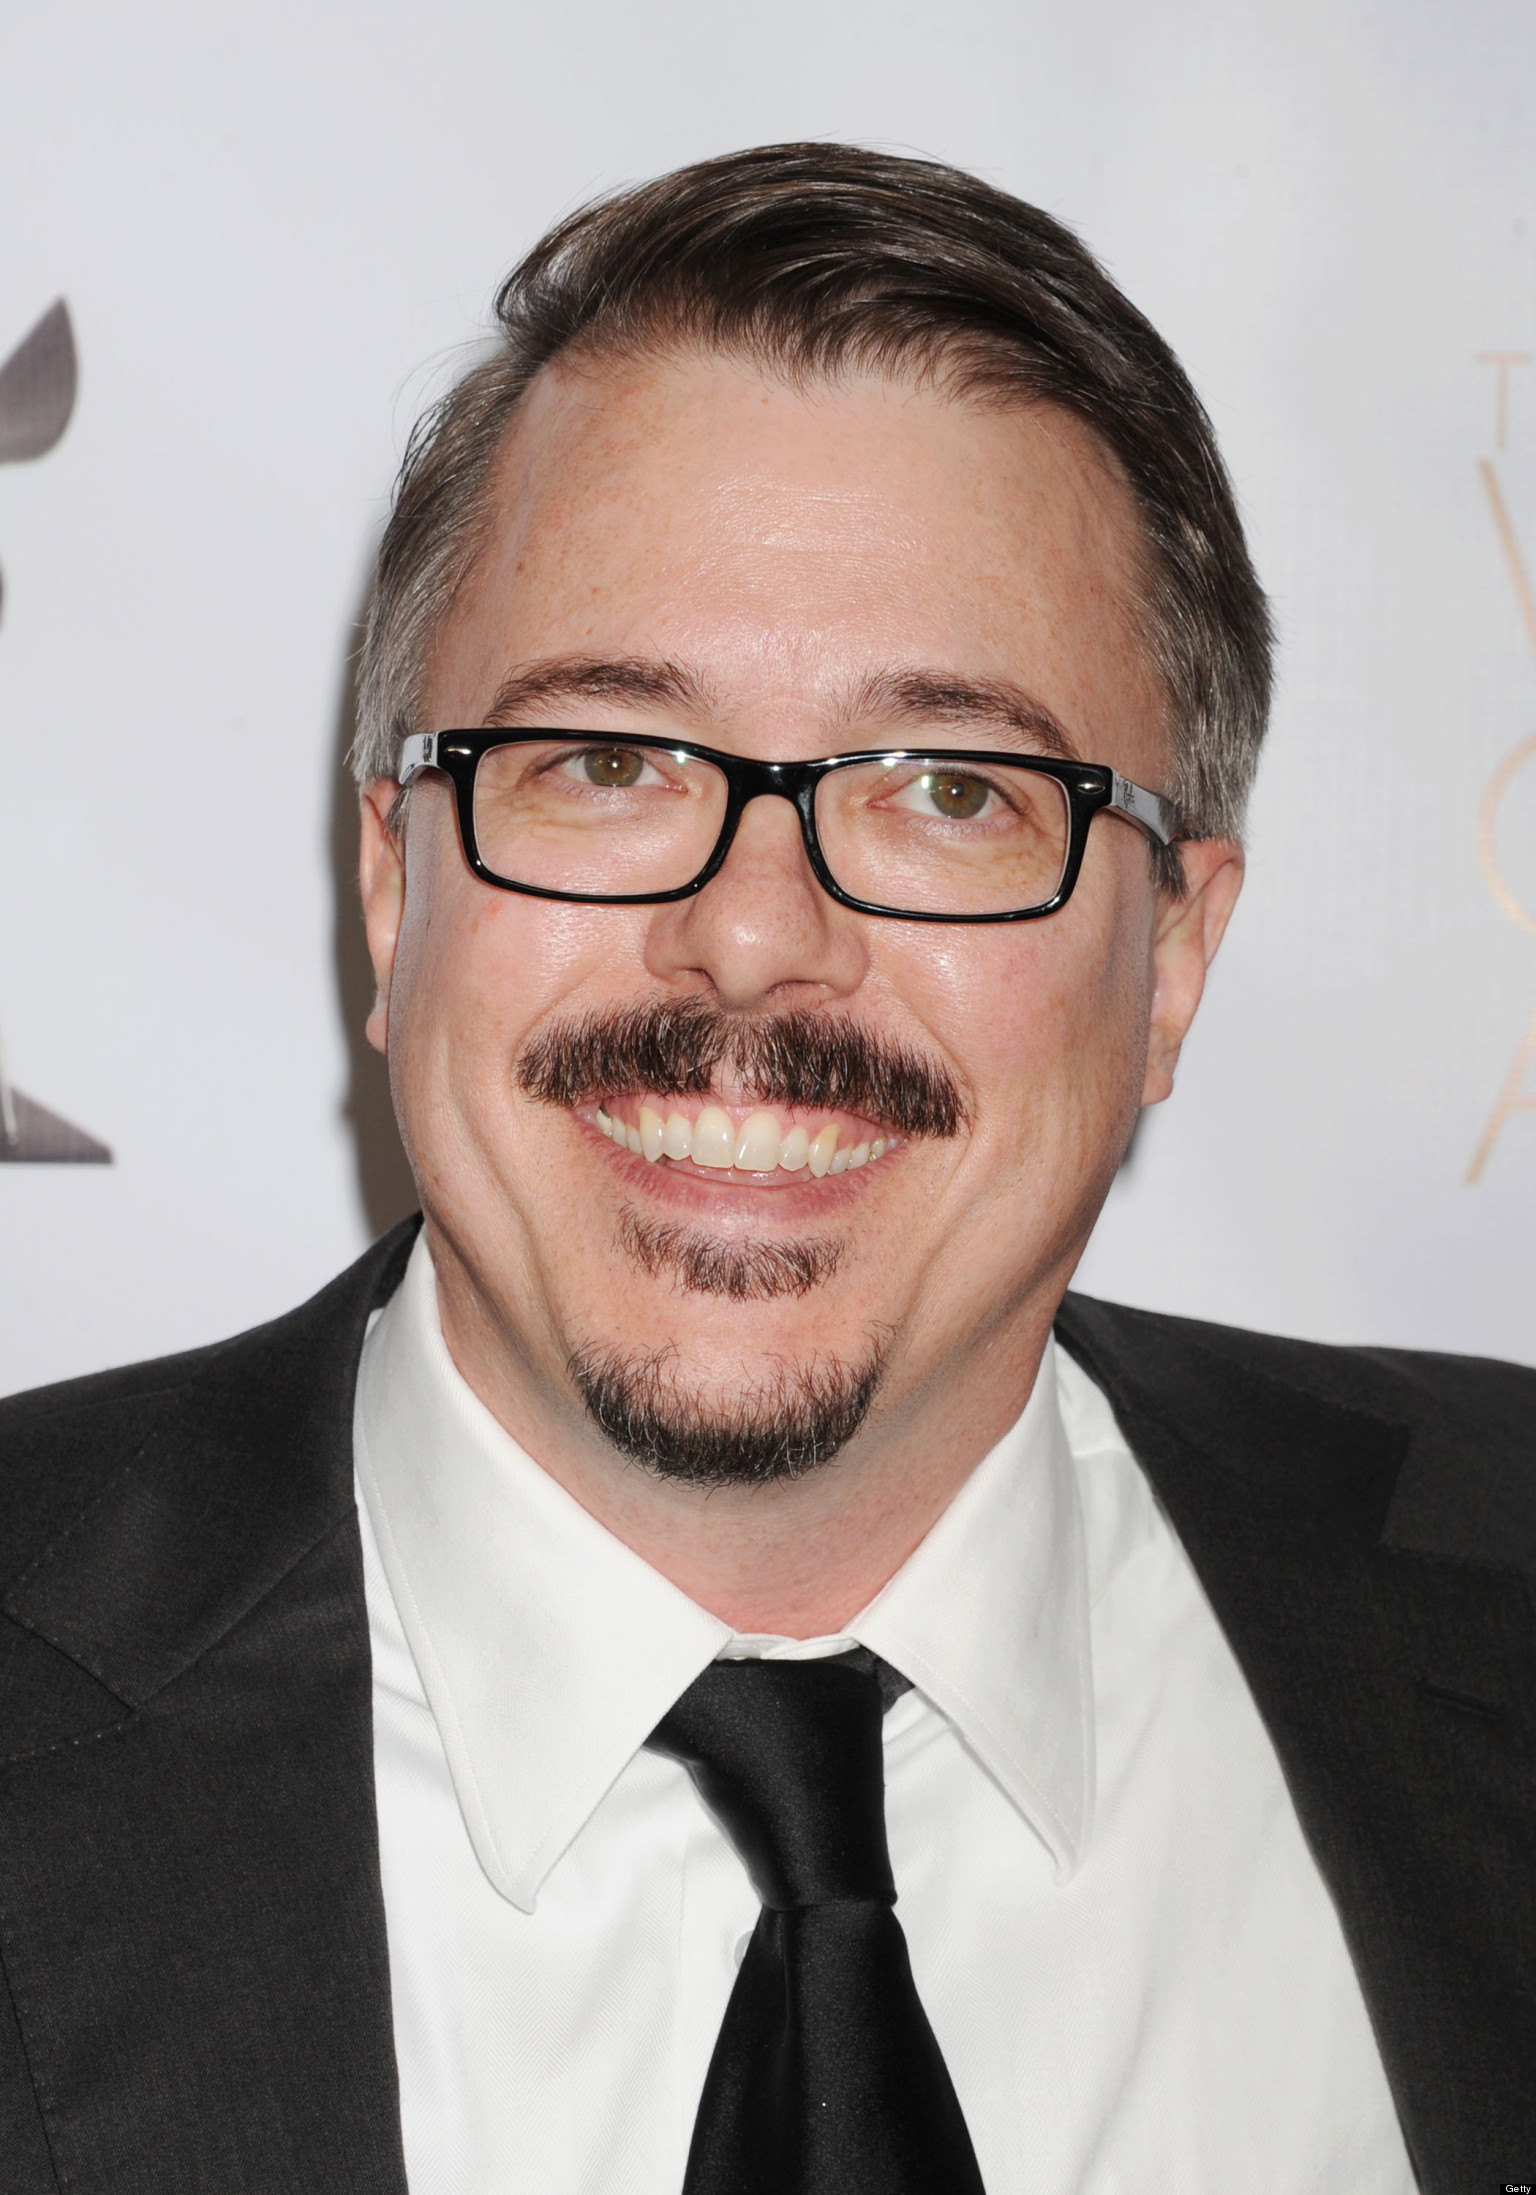 Is vince gilligan writing a new show